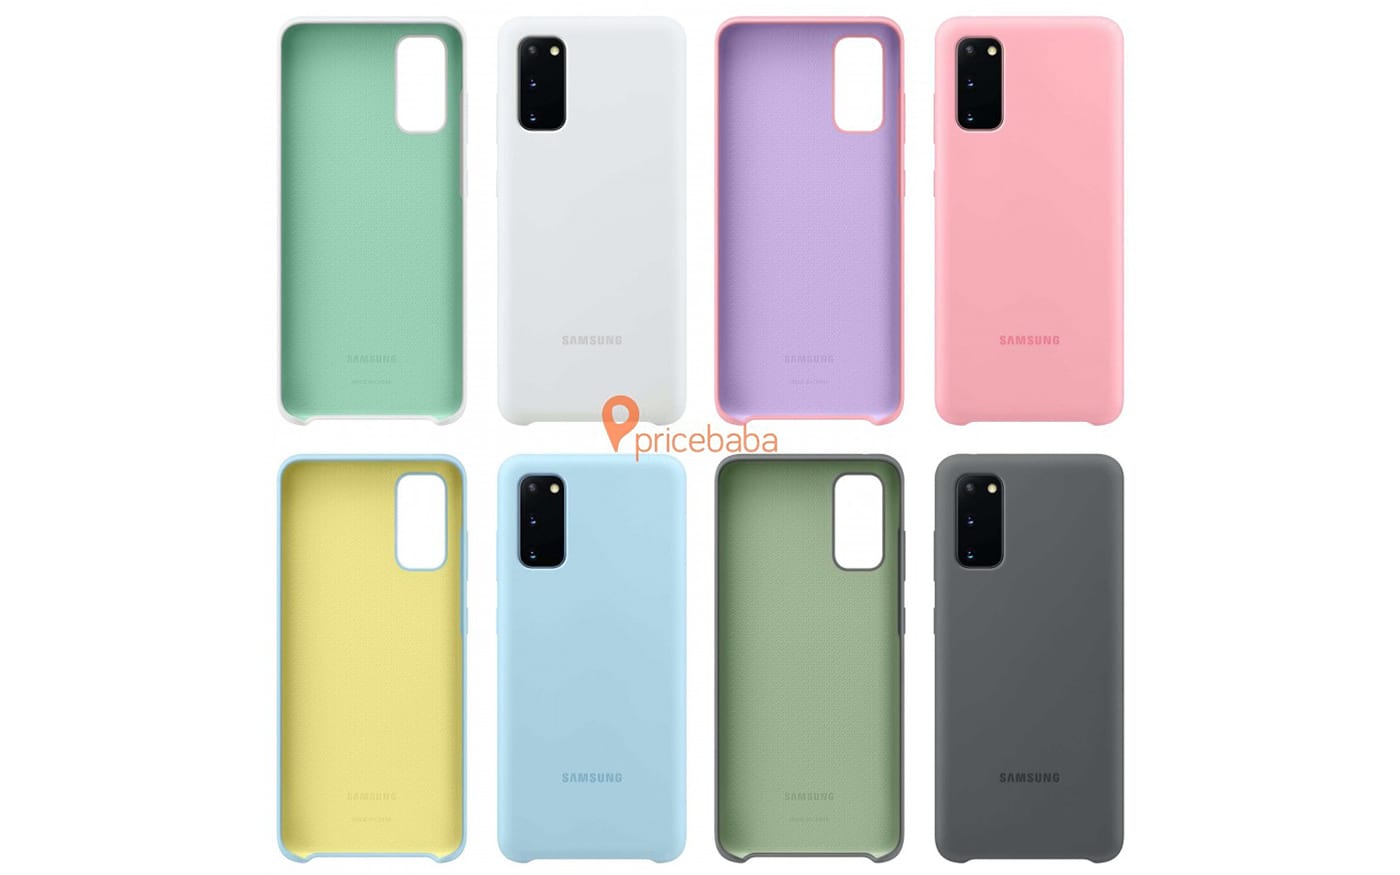 These are the official Galaxy S20 cases